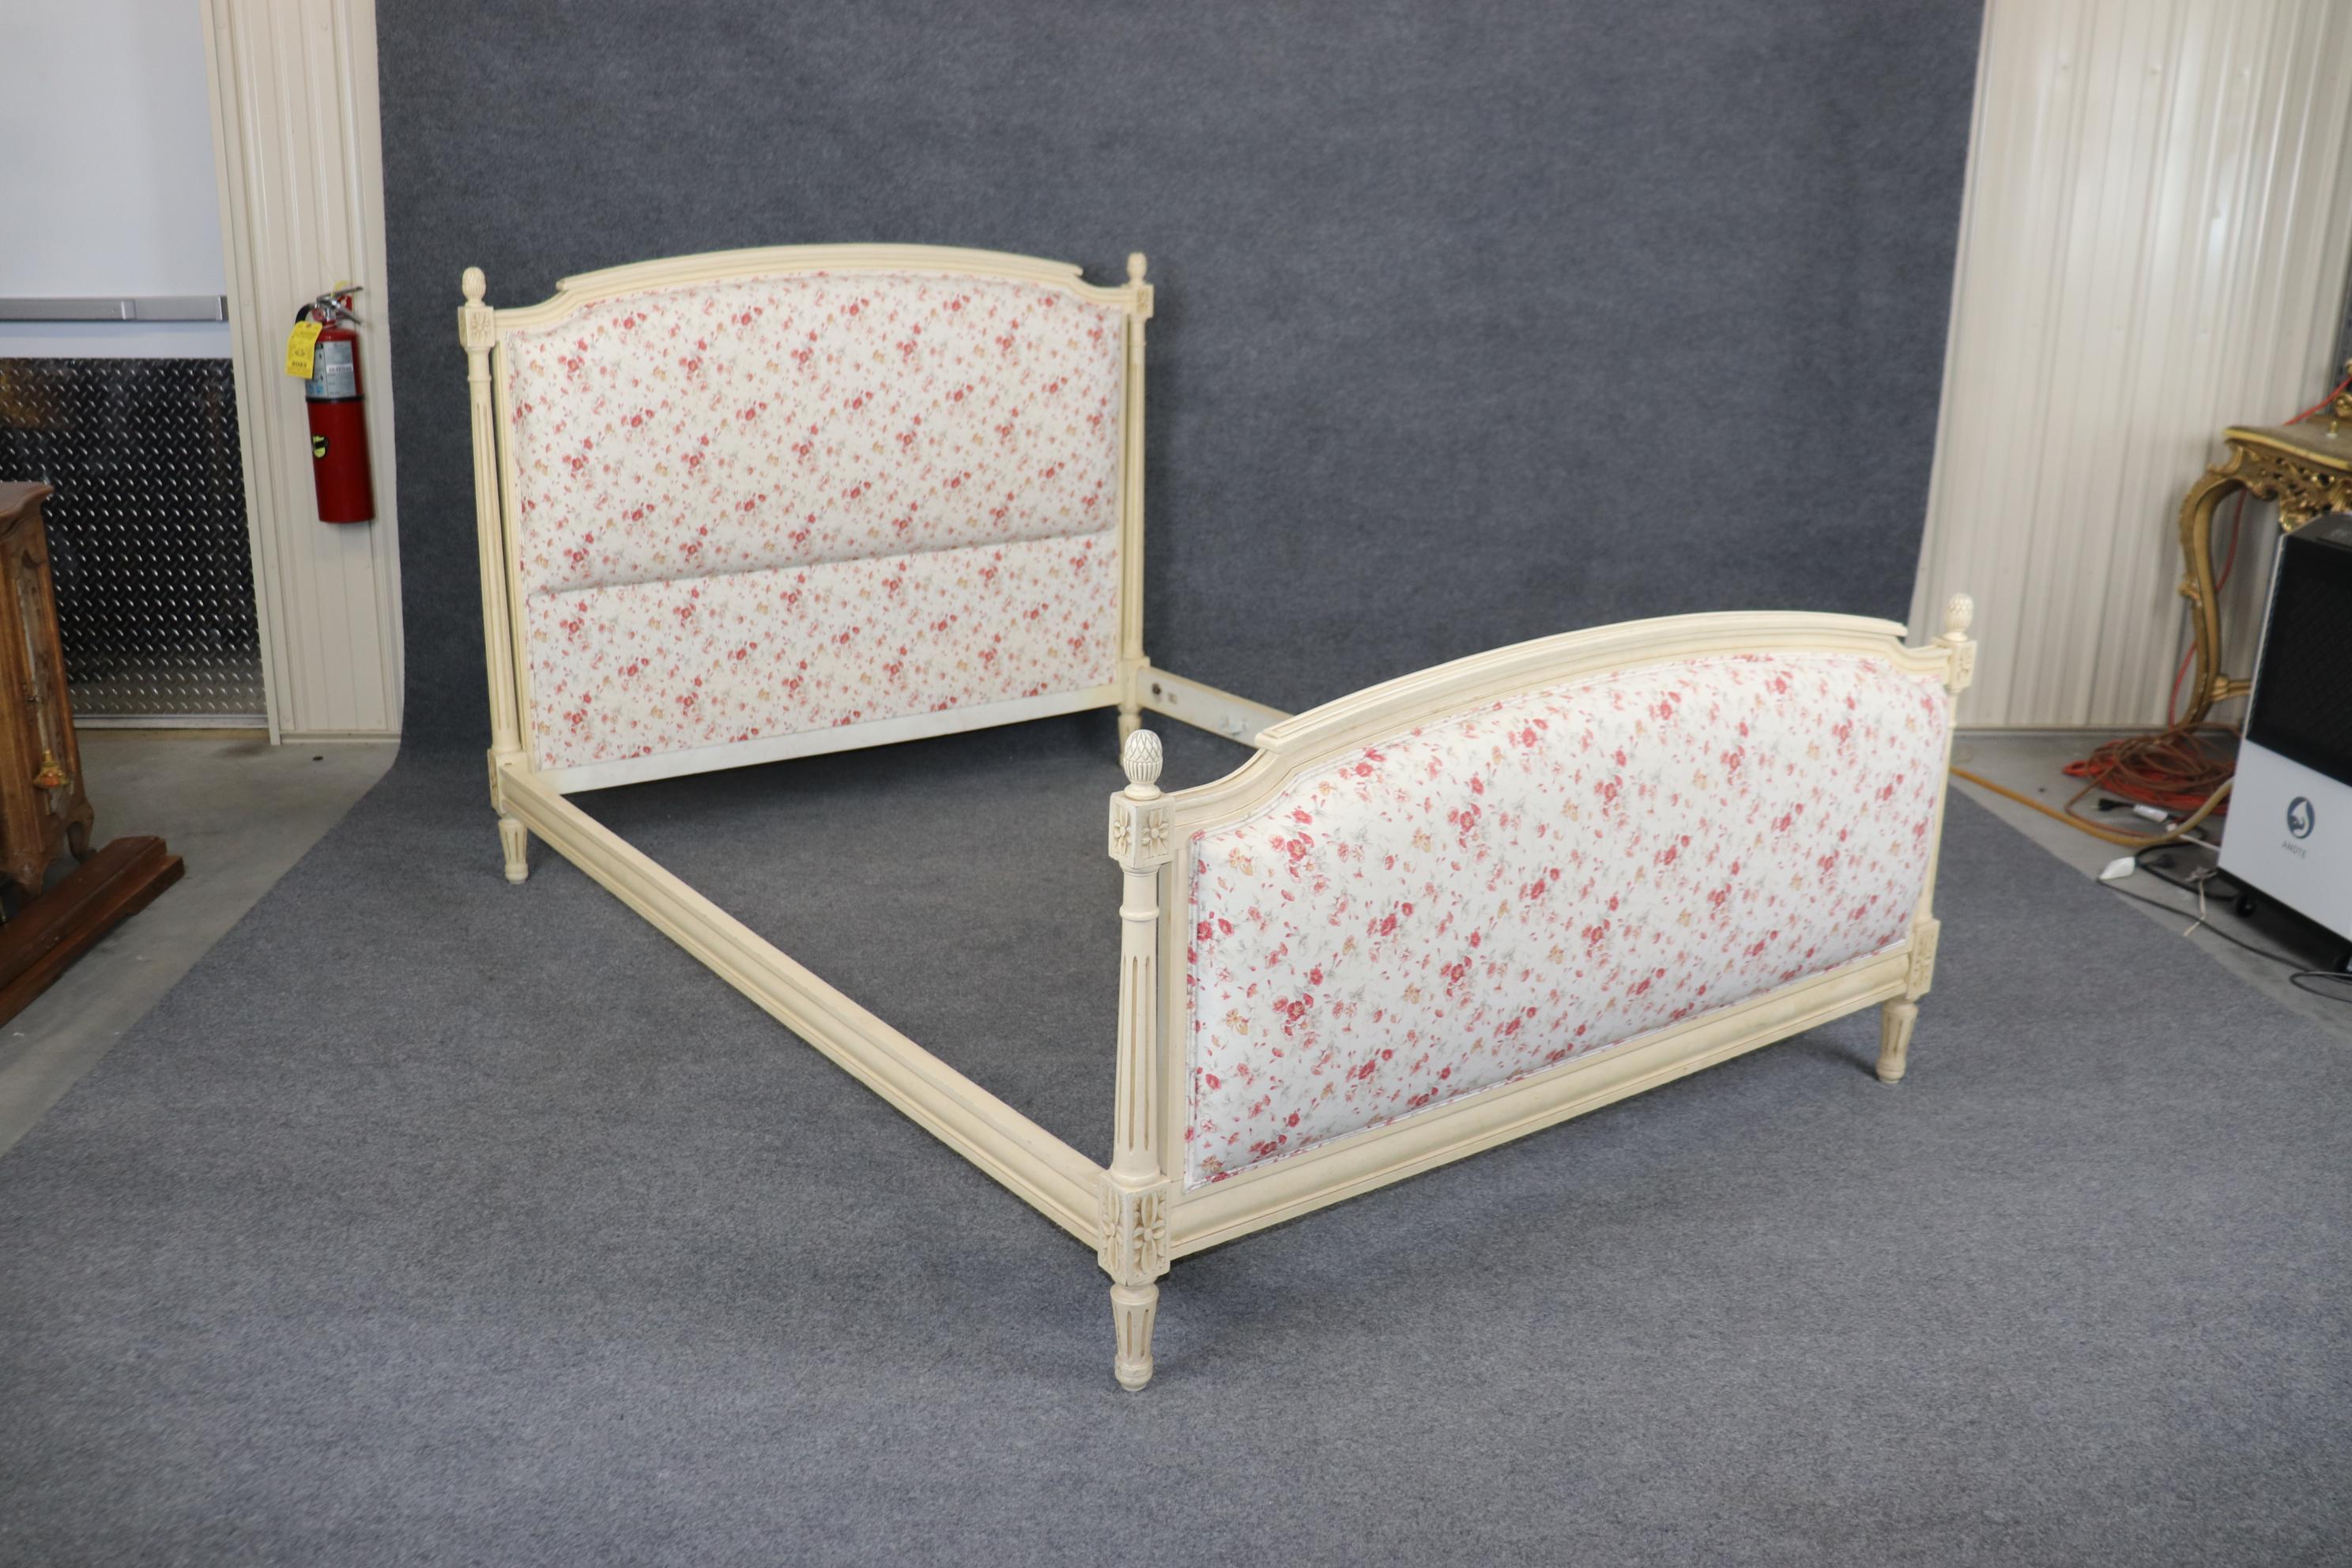 This is a dreamy floral upholstered creme paint decorated genuine French made bed. The bed is a full-size bed and may differ slightly from an American standard size because it's French. The finish is in good vintage condition and the upholstery is